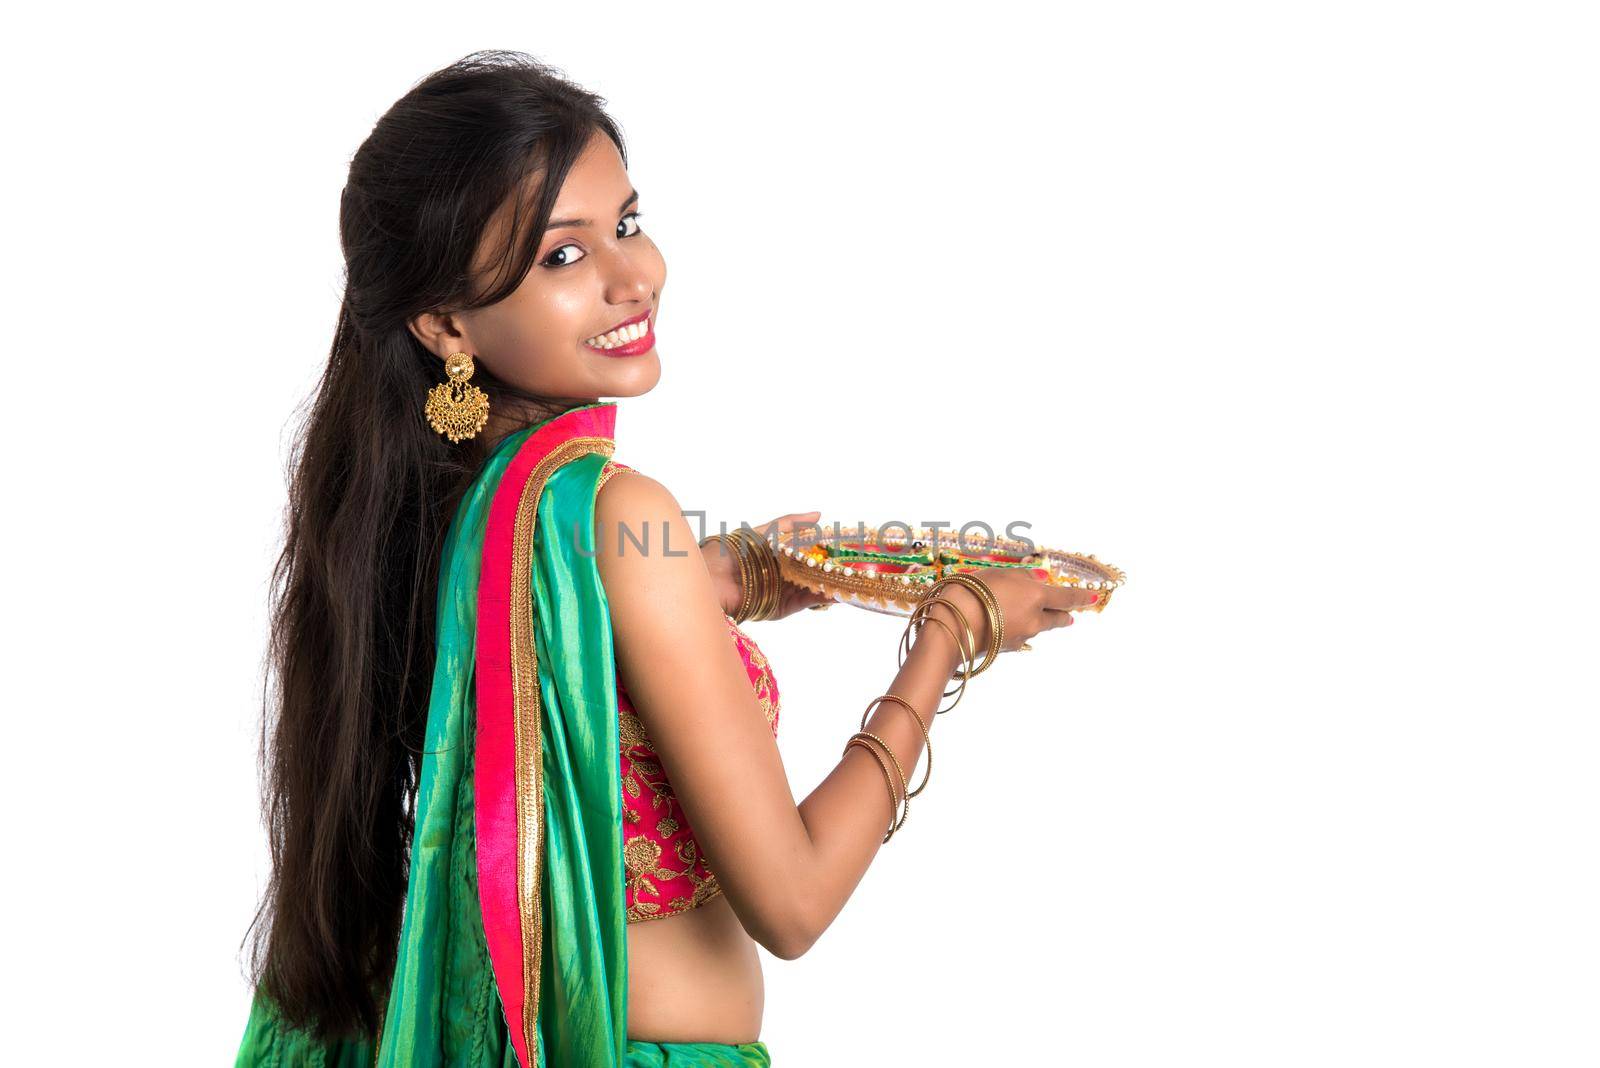 Portrait of a Indian Traditional Girl holding Diya, Girl Celebrating Diwali or Deepavali with holding oil lamp during festival of light on white background by DipakShelare